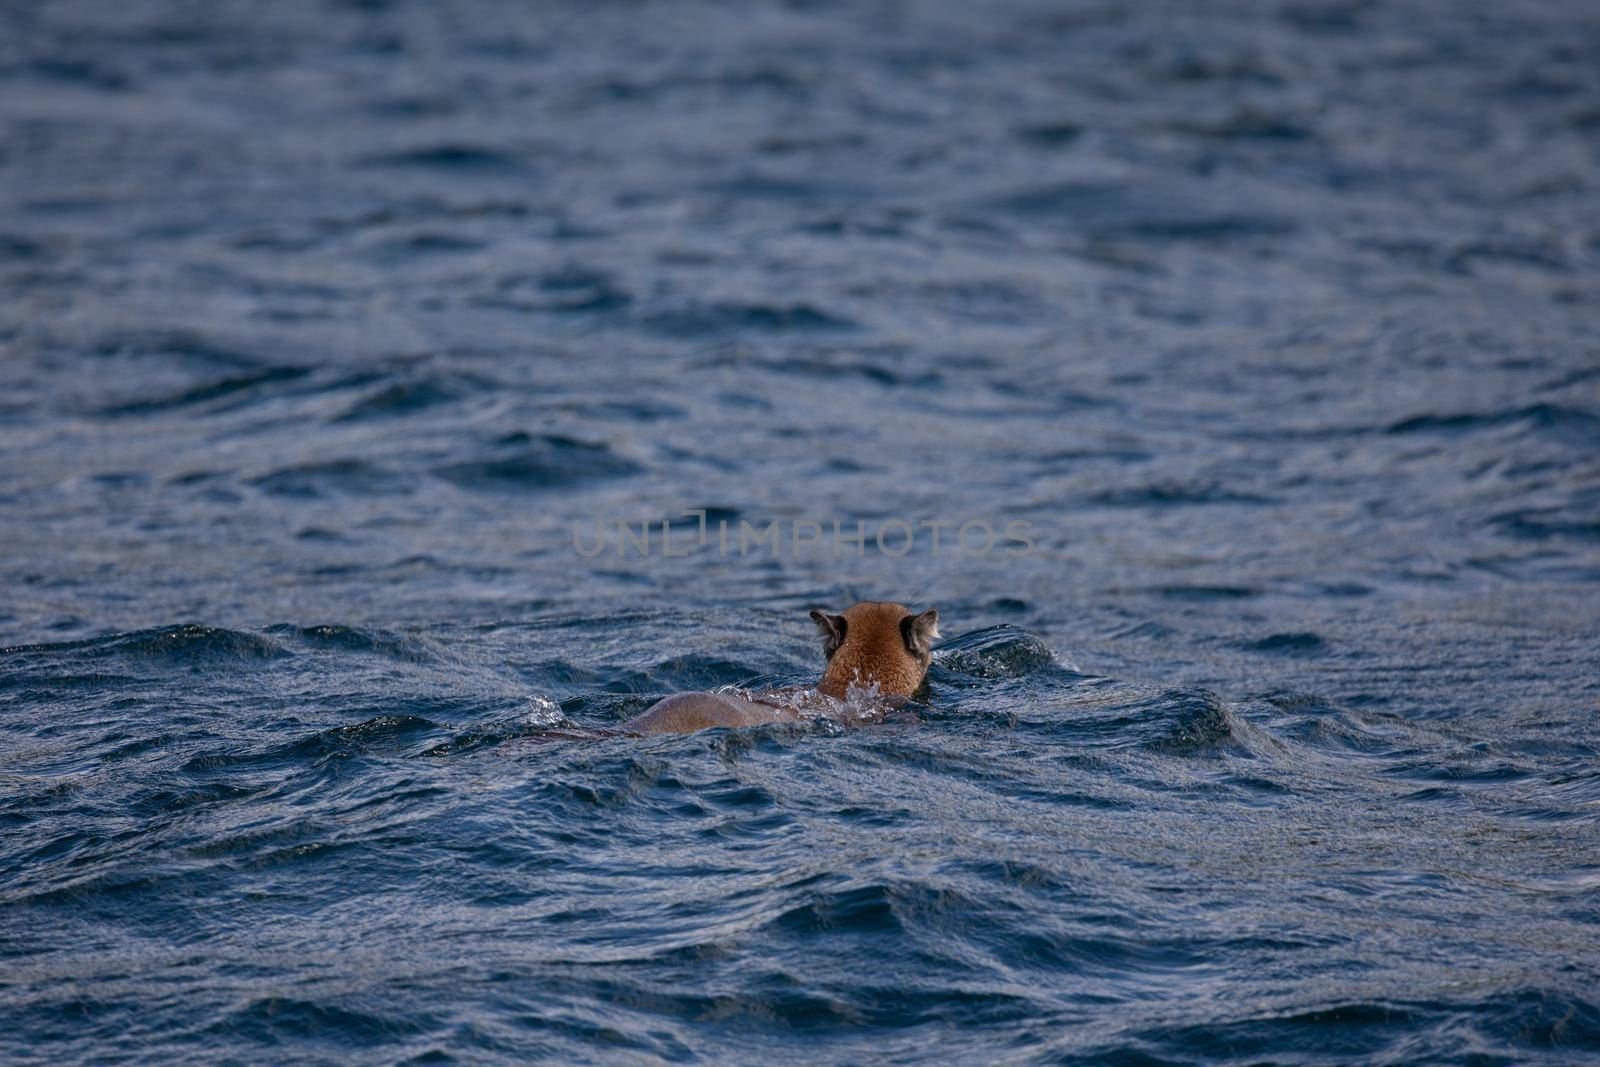 A cougar or mountain lion swimming away in British Columbia waters by Granchinho